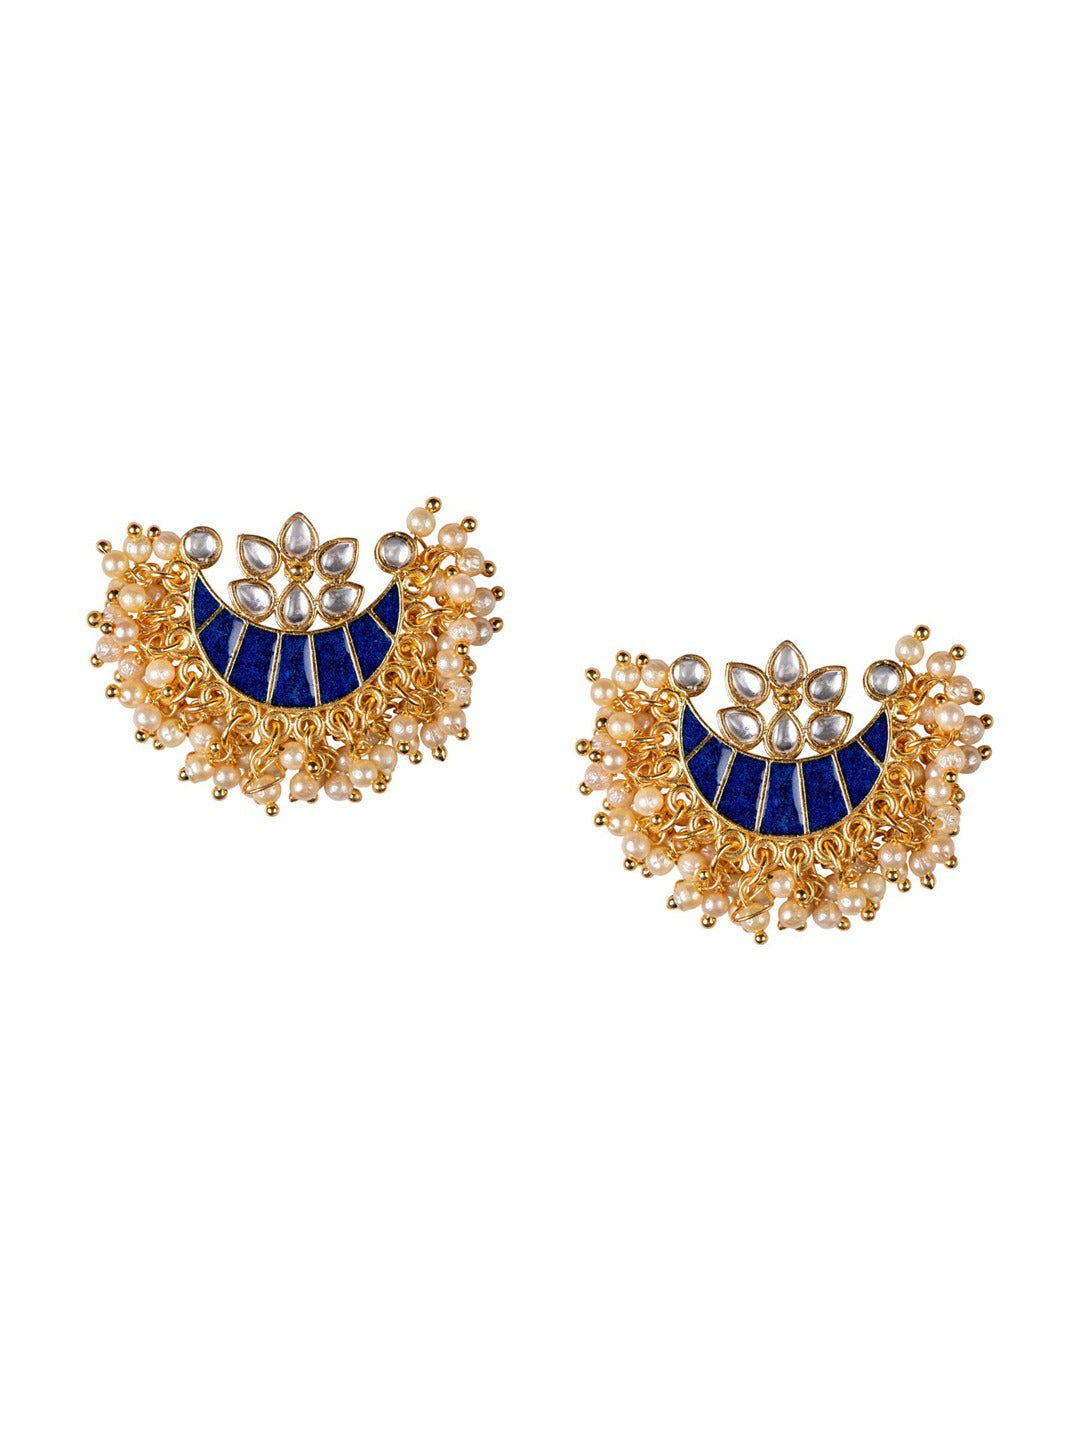 Women's  Blue & Gold-Toned Contemporary Studs Earrings - Morkanth